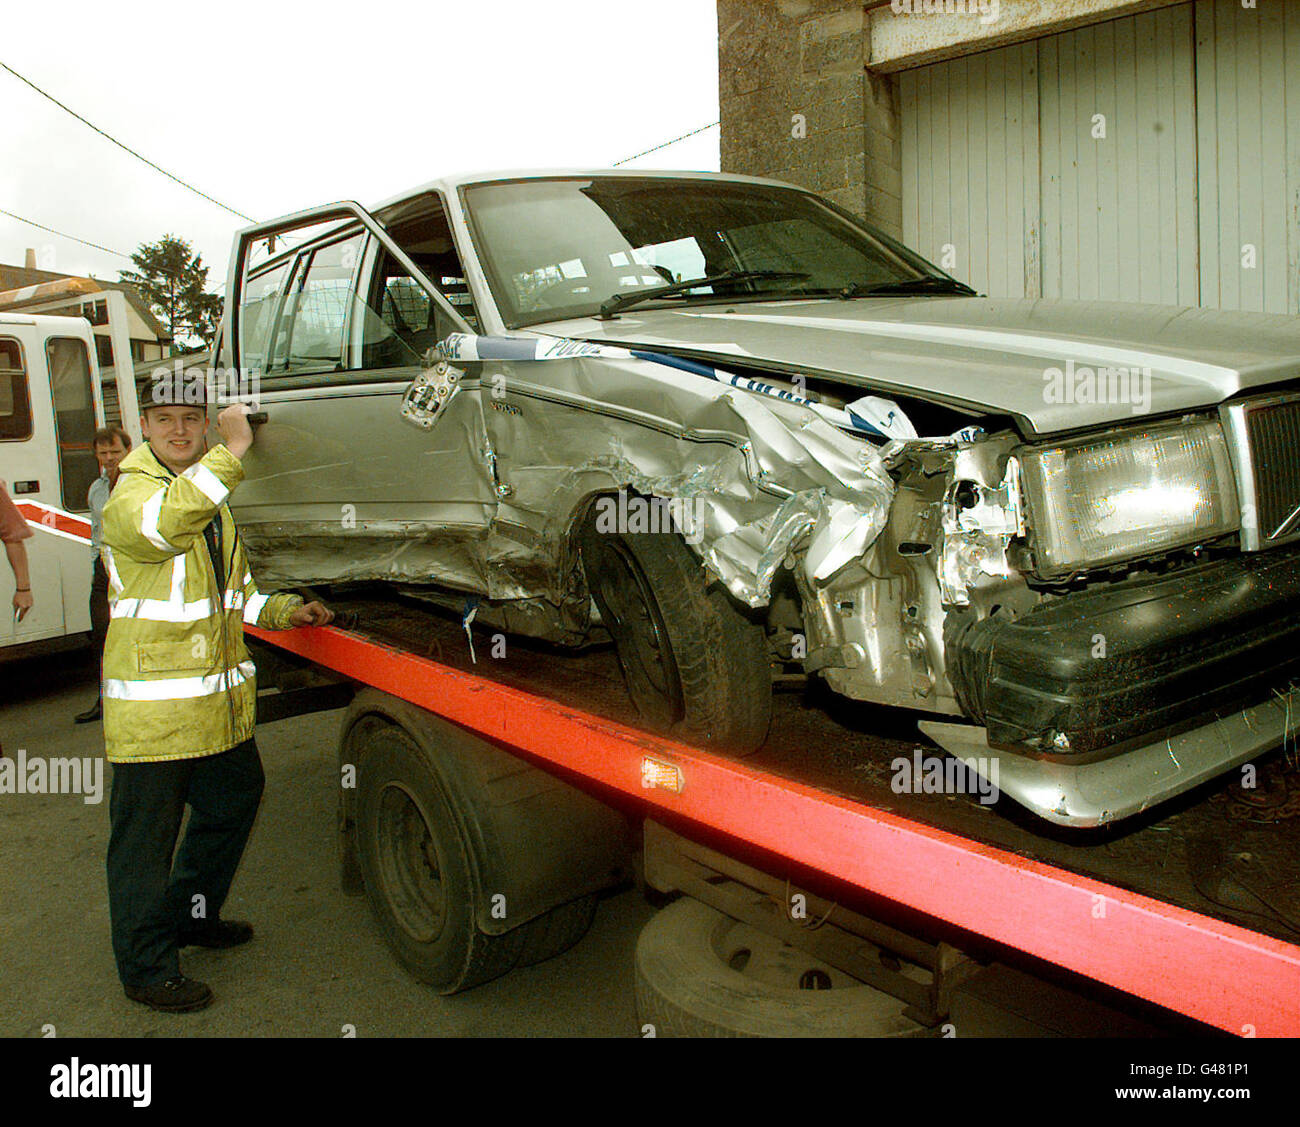 The volvo involved in a head-on collision with Camilla Parker Bowles in her Ford Mondeo last night arrives severly dented at a local garage (Thursday). Mrs Parker Bowles, who suffered a severe blow to the head was taken to the Prince of Wales's Highgrove Estate after the collision which occured at a well-known black spot near Malmesbury. See PA story ACCIDENT Camilla.PA PHOTO. Stock Photo